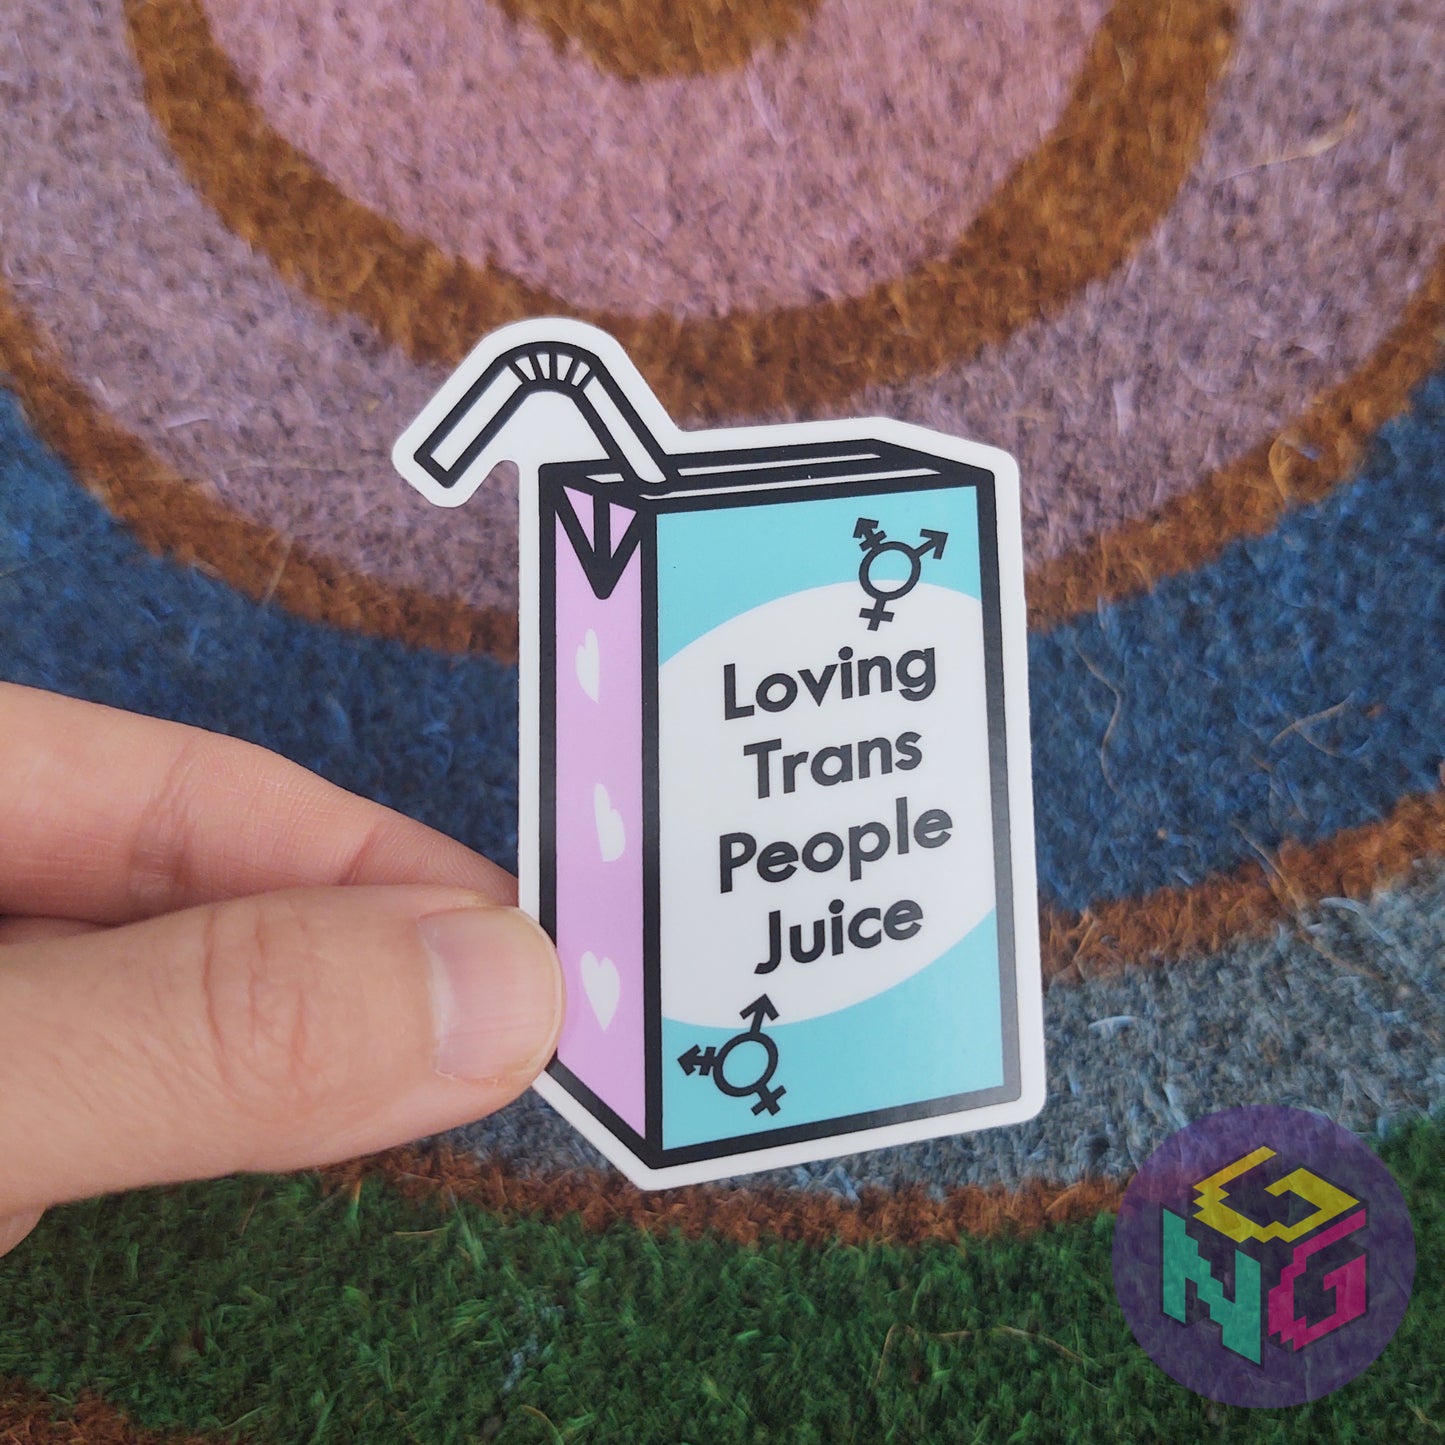 loving trans people juice sticker held in front of rainbow welcome mat